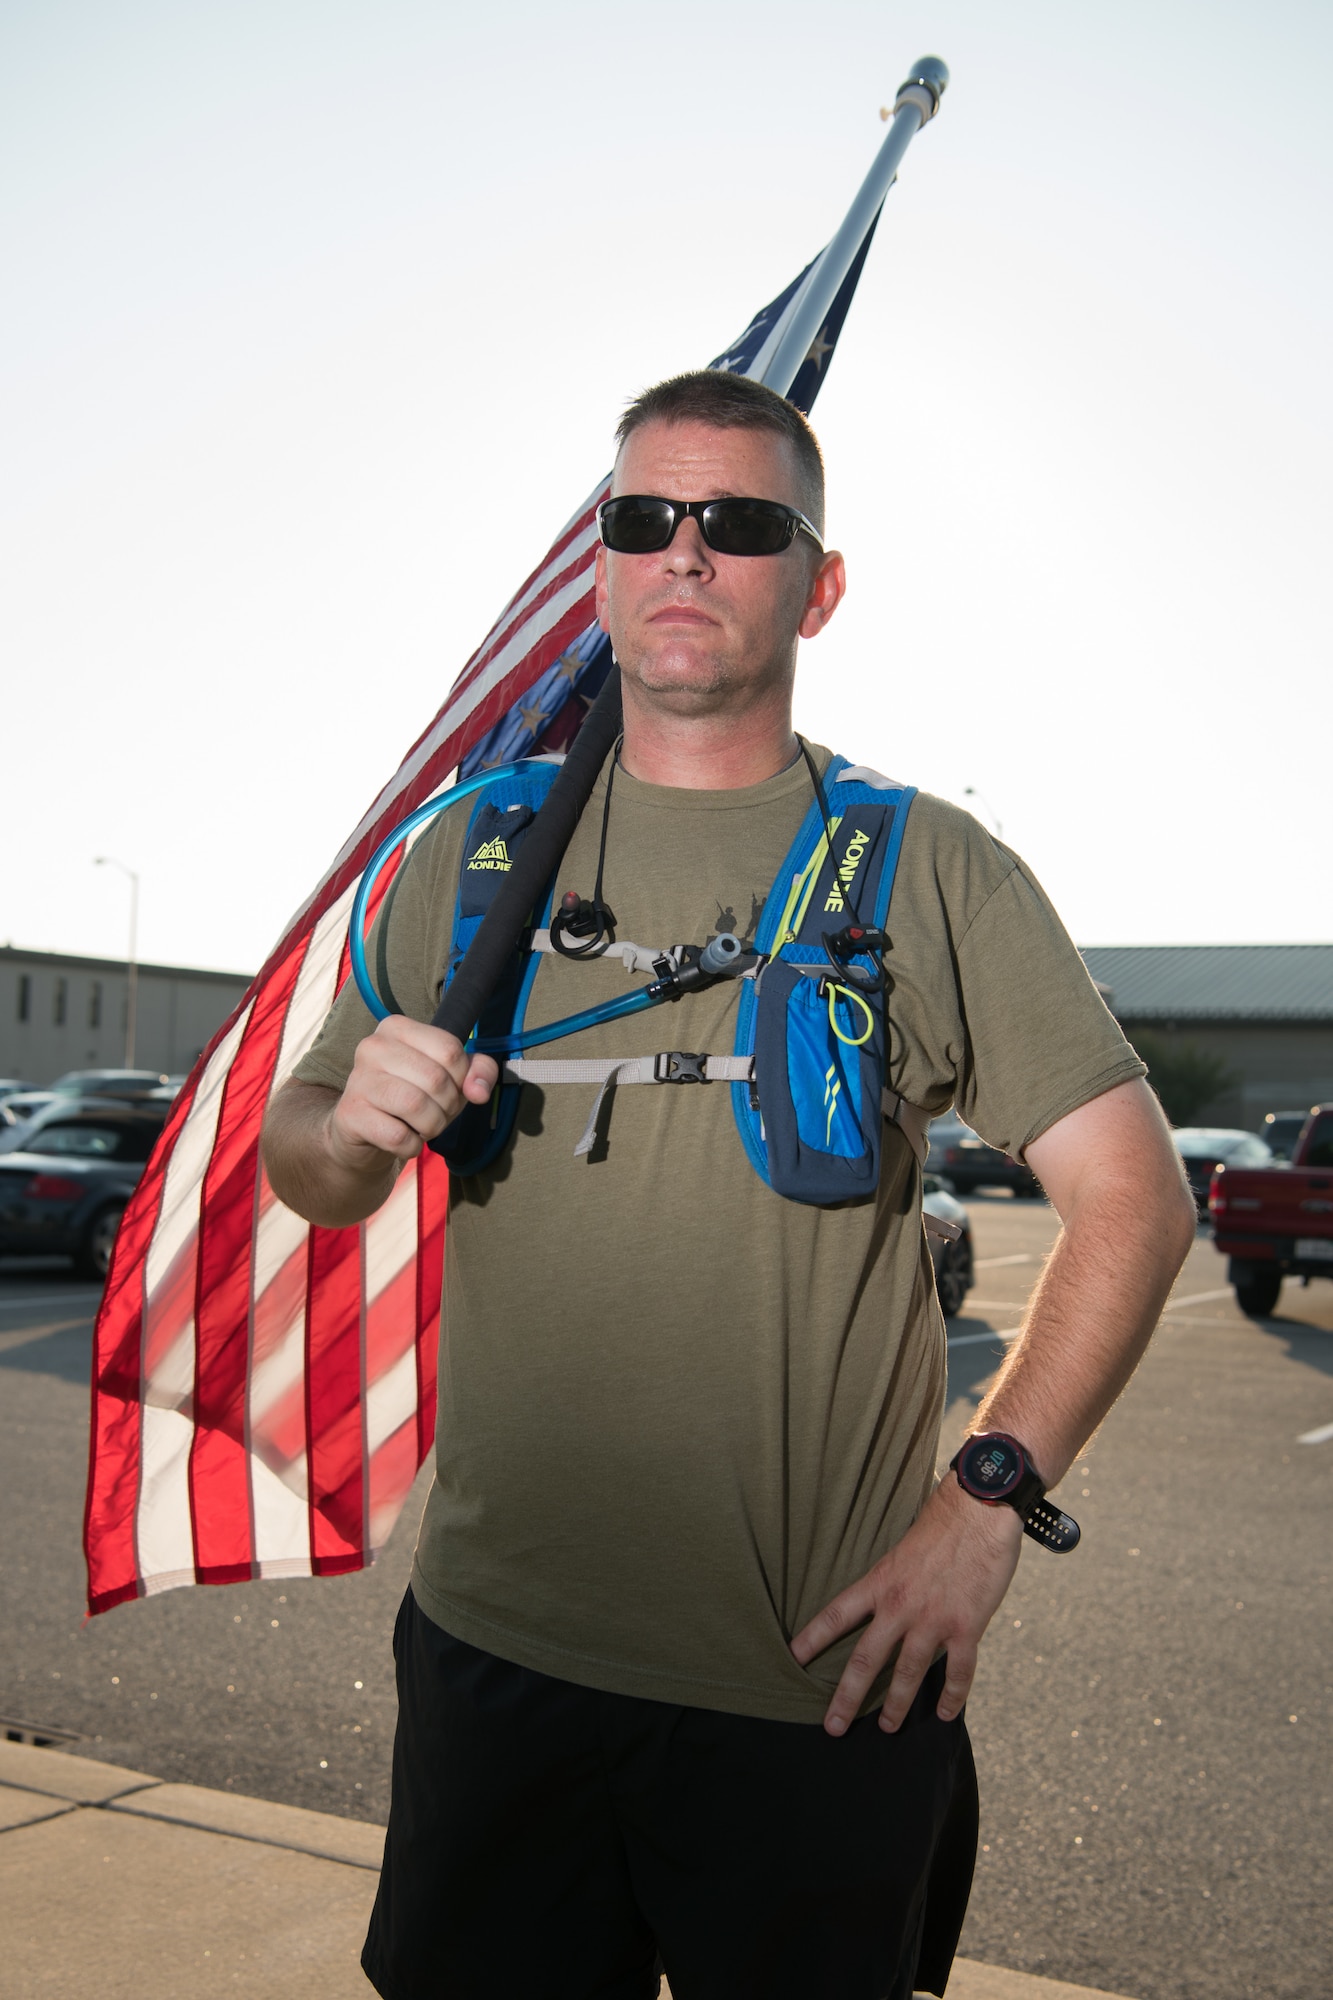 Master Sgt. Trevor Derr, 736th Aircraft Maintenance Squadron C-17 production superintendent, holds an American flag over his shoulder Sept. 12, 2019, at Dover Air Force Base, Del. Derr carries the flag whenever he runs to honor the memory of a friend he lost to suicide, and raise awareness of post-traumatic stress disorder. (U.S. Air Force Photo by Mauricio Campino)